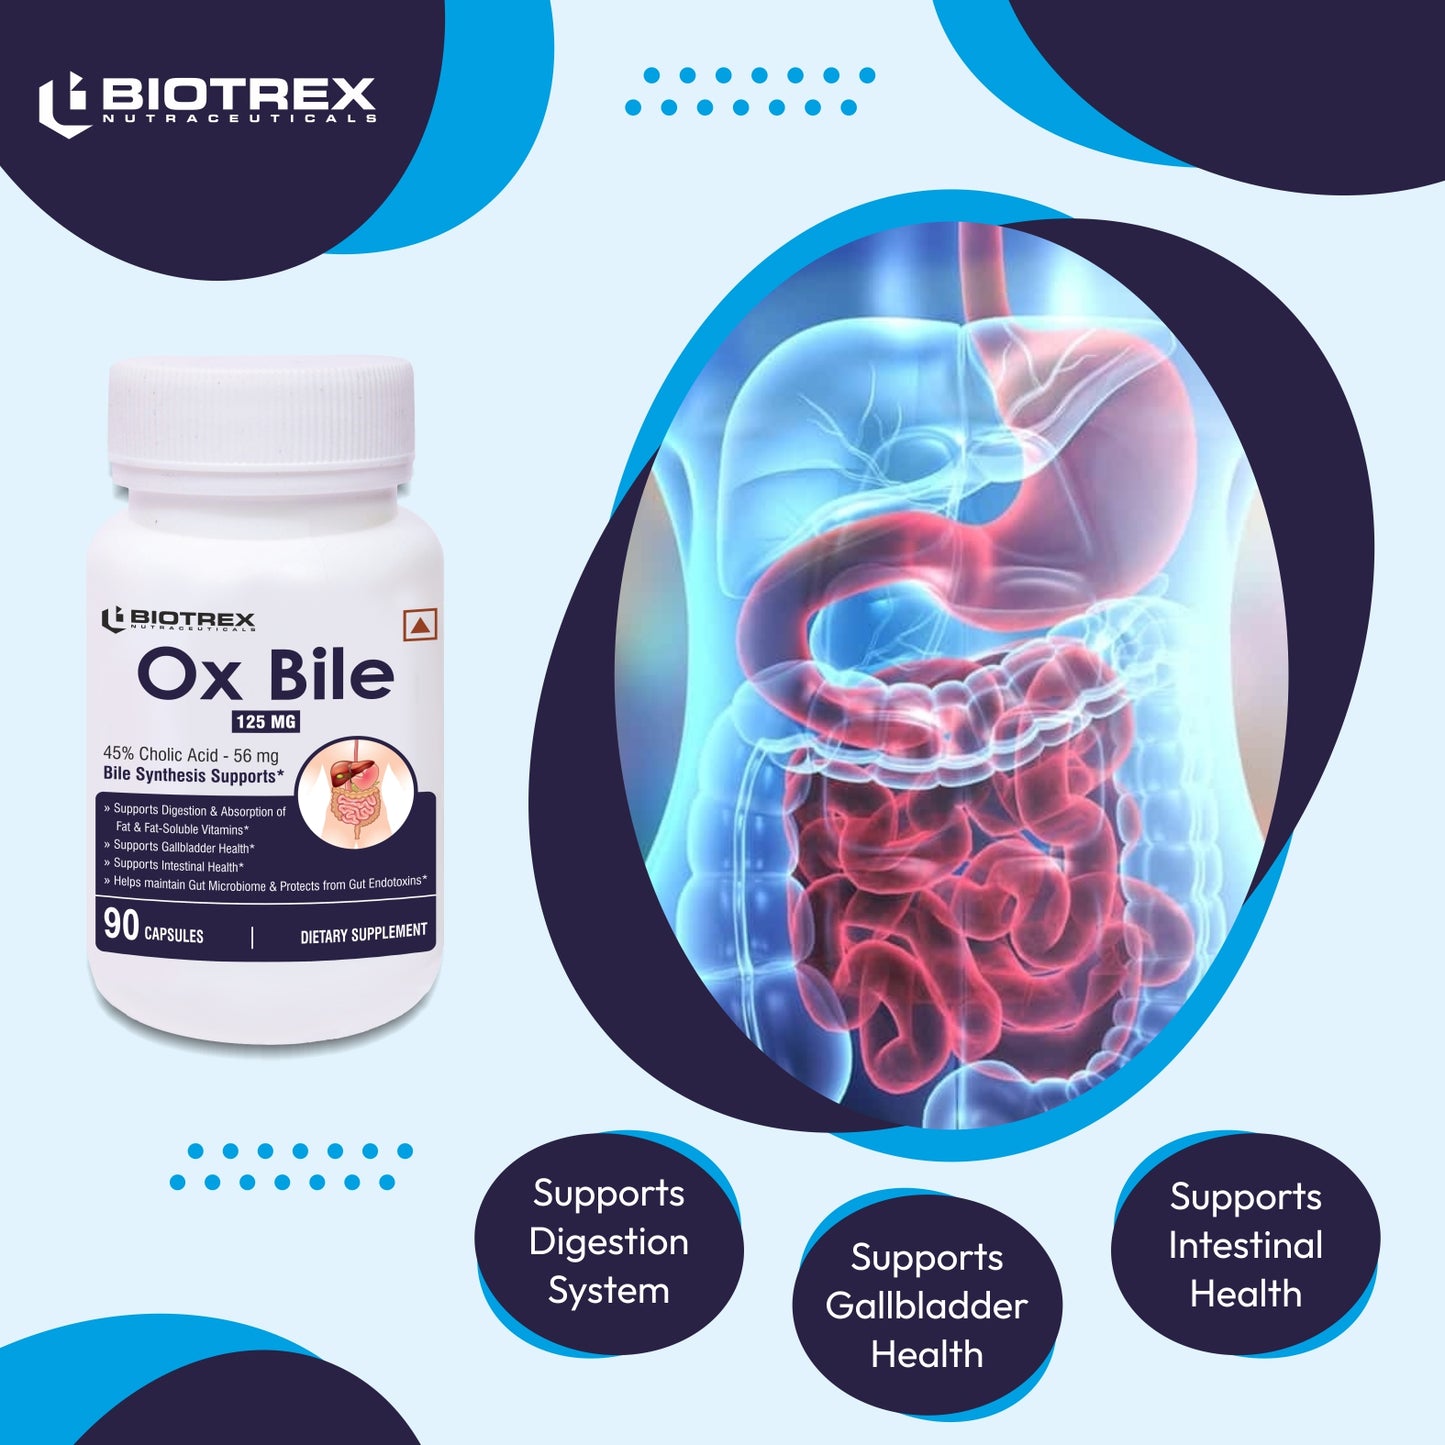 Biotrex Nutraceuticals OX BILE EXTRACT 125mg, 45% CHOLIC ACID, Supports Gallbladder Health & Supports Healthy Digestion, Bile Synthesis Support, (Gluten Free & Non-GMO) - 90 Capsules